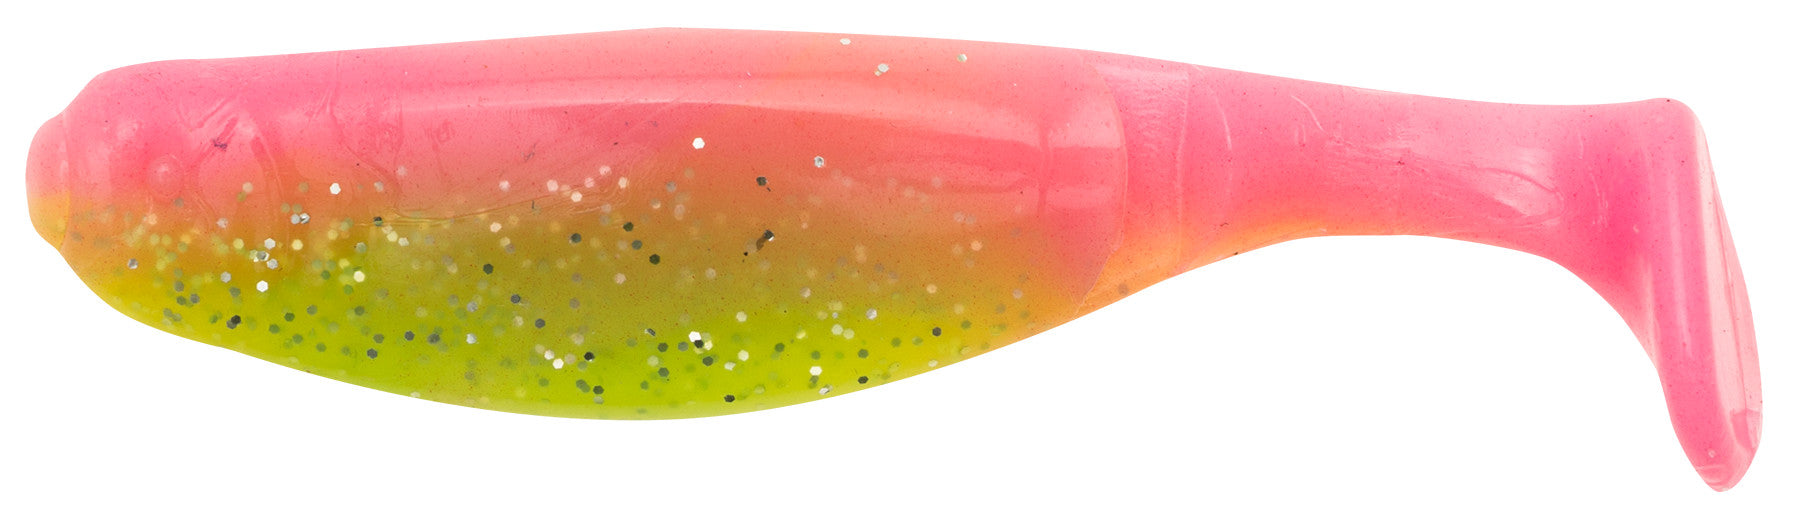 Z-Man Scented PogyZ 3 inch Paddle Tail Swimbait 5 pack